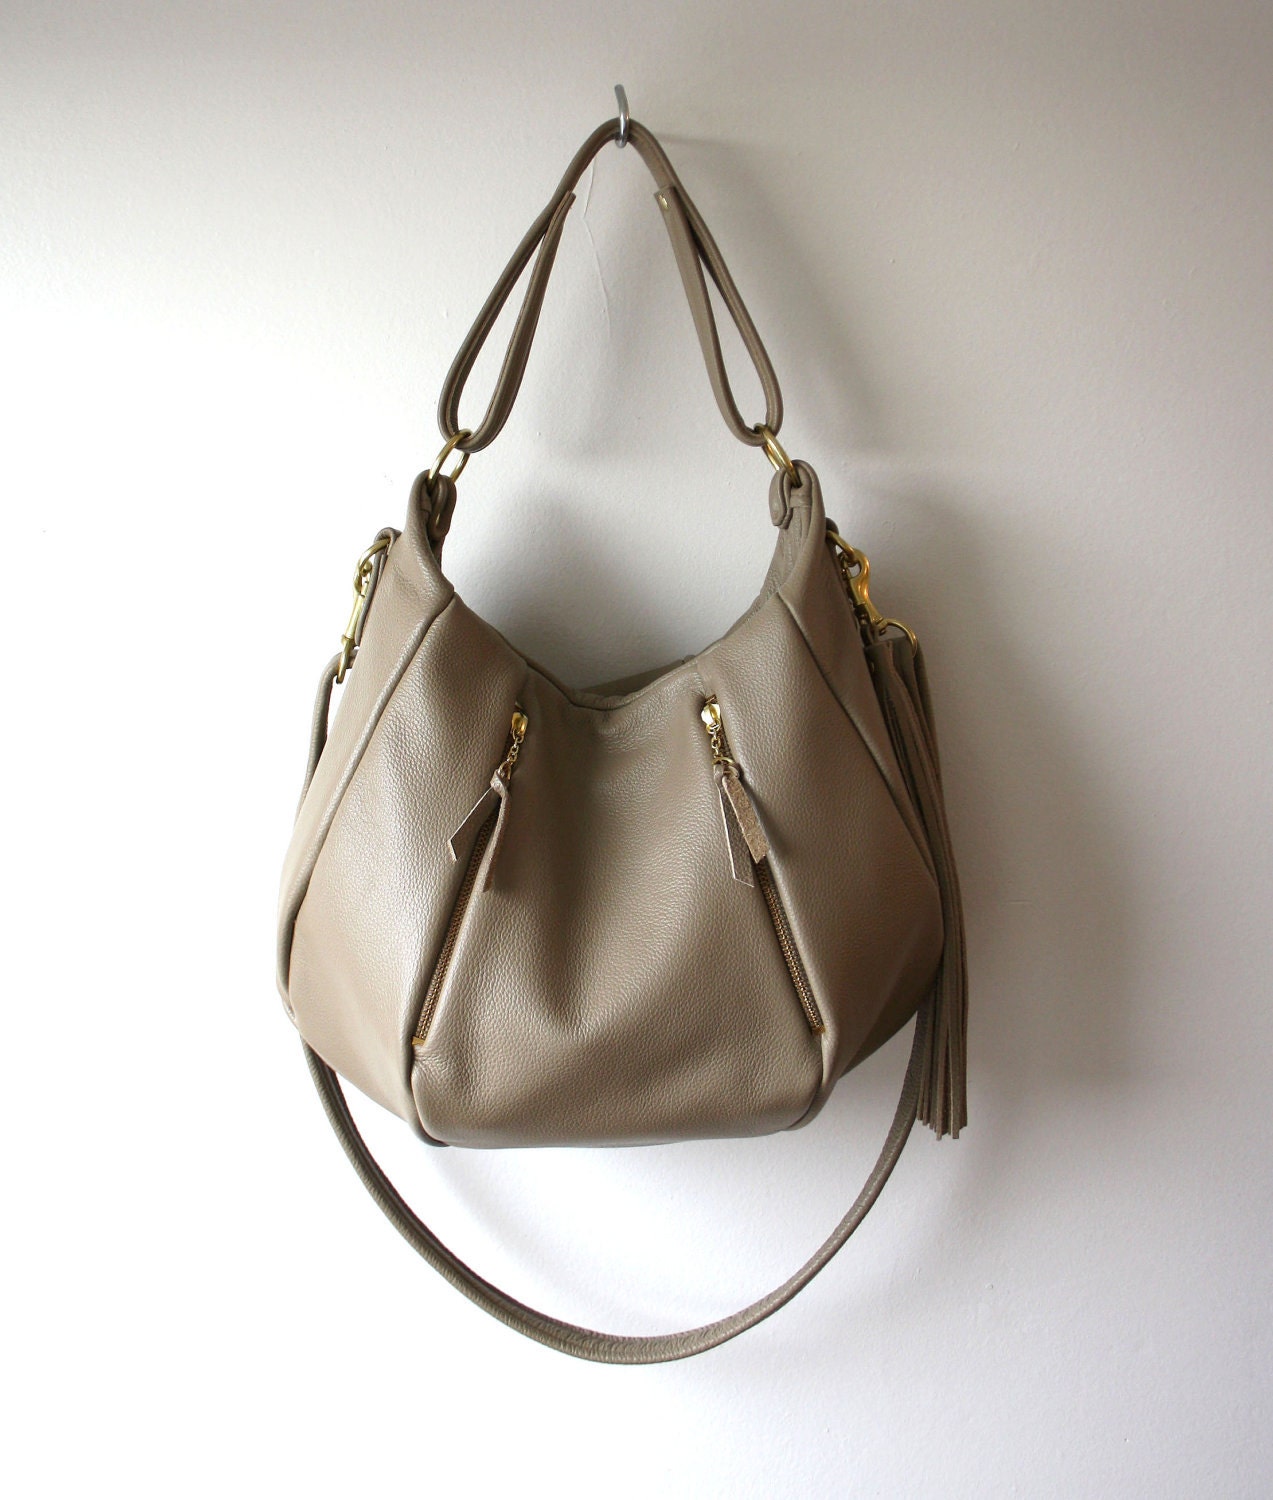 Leather Bag Purse - OPELLE Ballet Bag - Large Size in Mink Pebbled Leather New